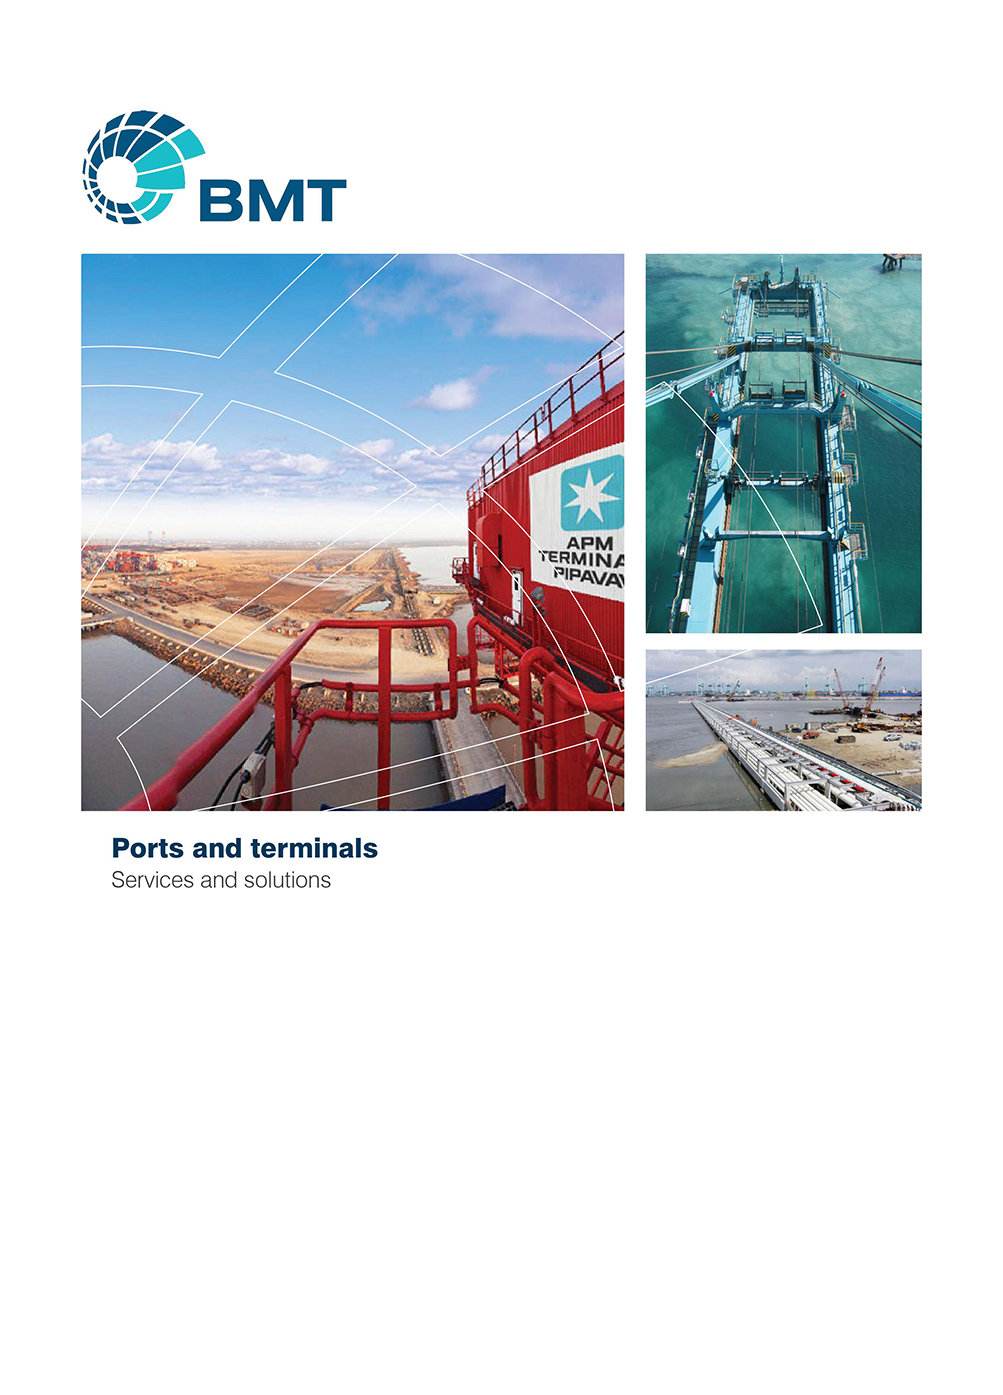 BMT's ports and terminals services